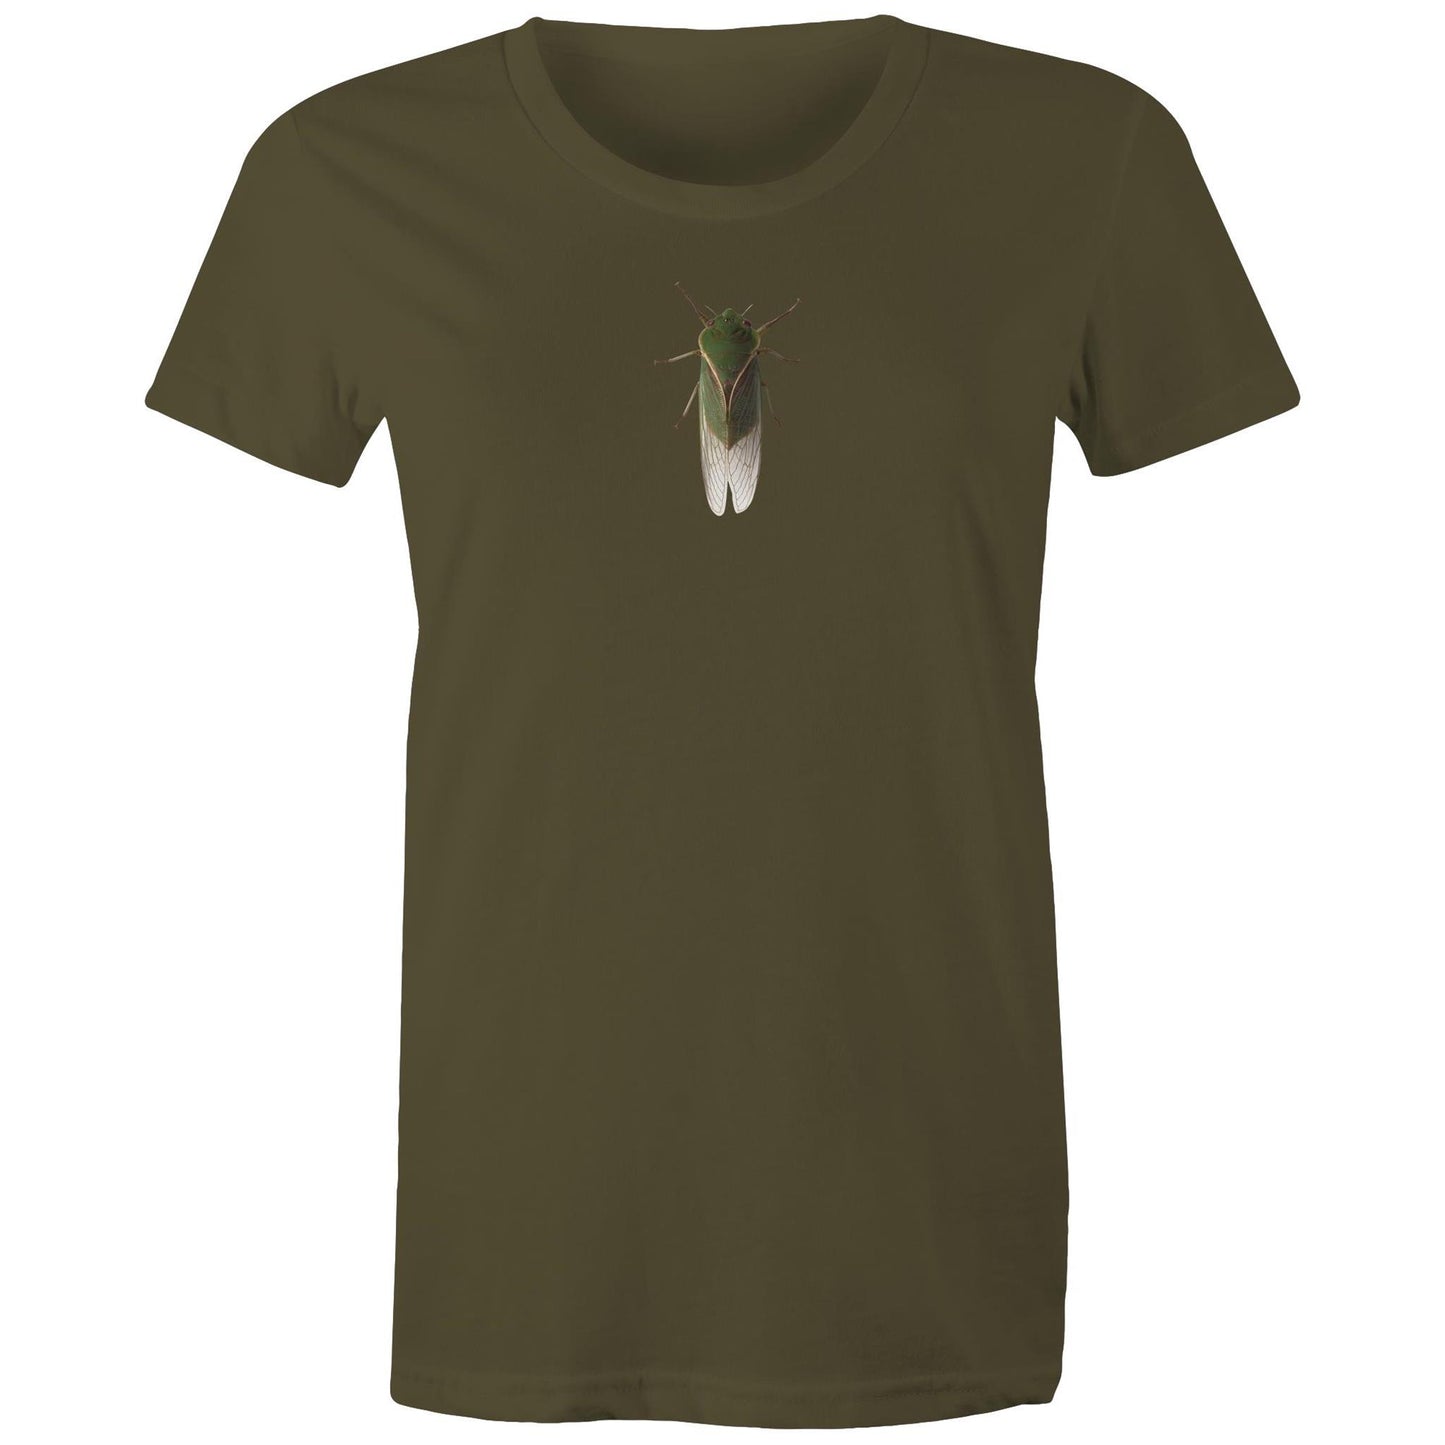 The Little Guy T Shirts for Women